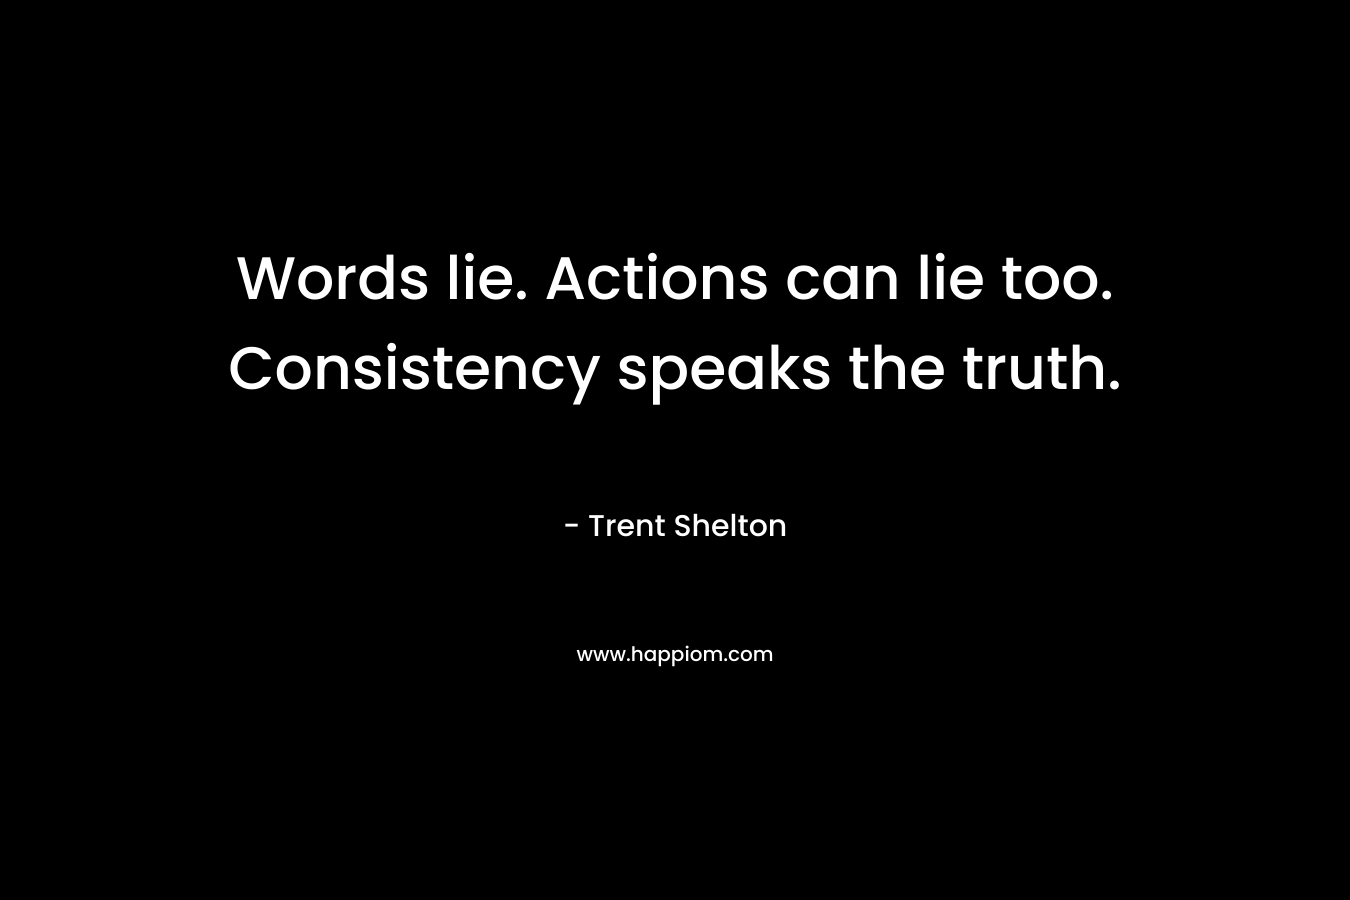 Words lie. Actions can lie too. Consistency speaks the truth.